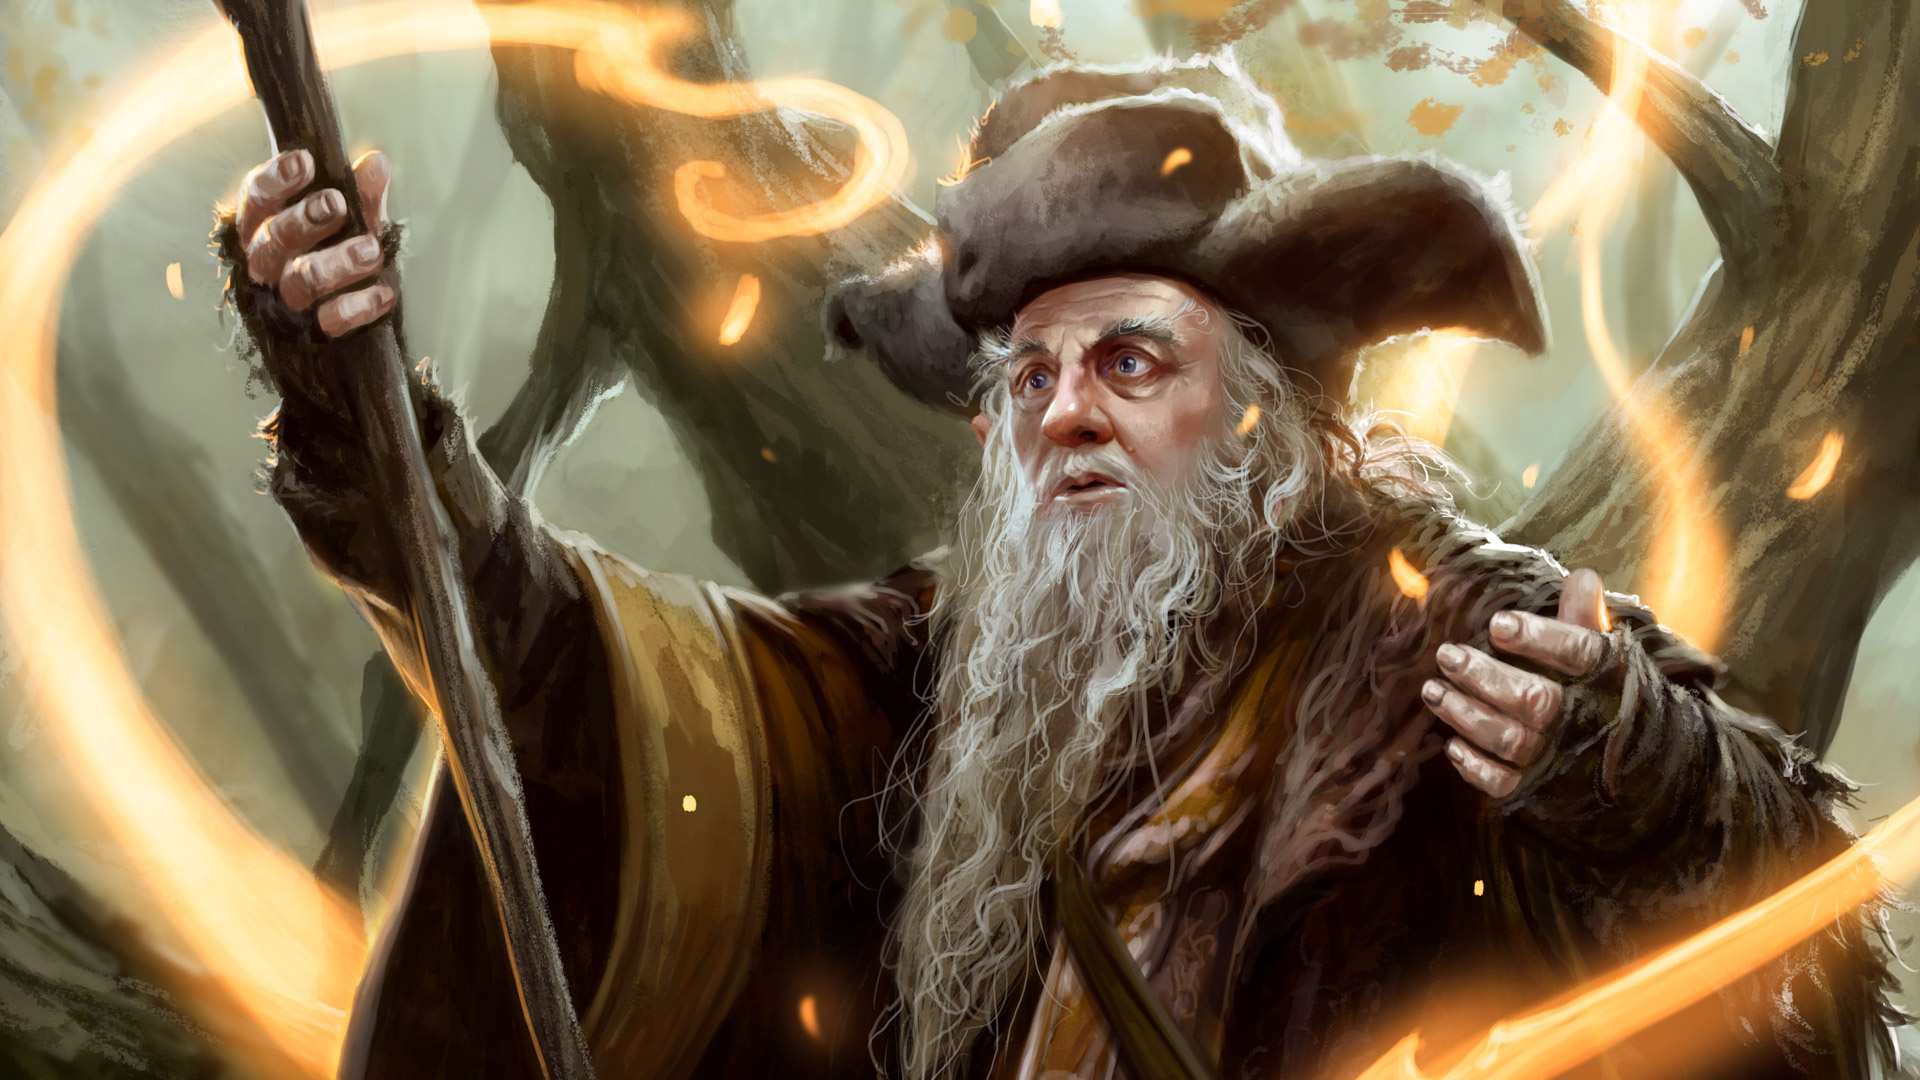 Guardians of Middle Earth wallpaper, Radagast the Brown, Battle for Middle Earth, Heroic and legendary, 1920x1080 Full HD Desktop